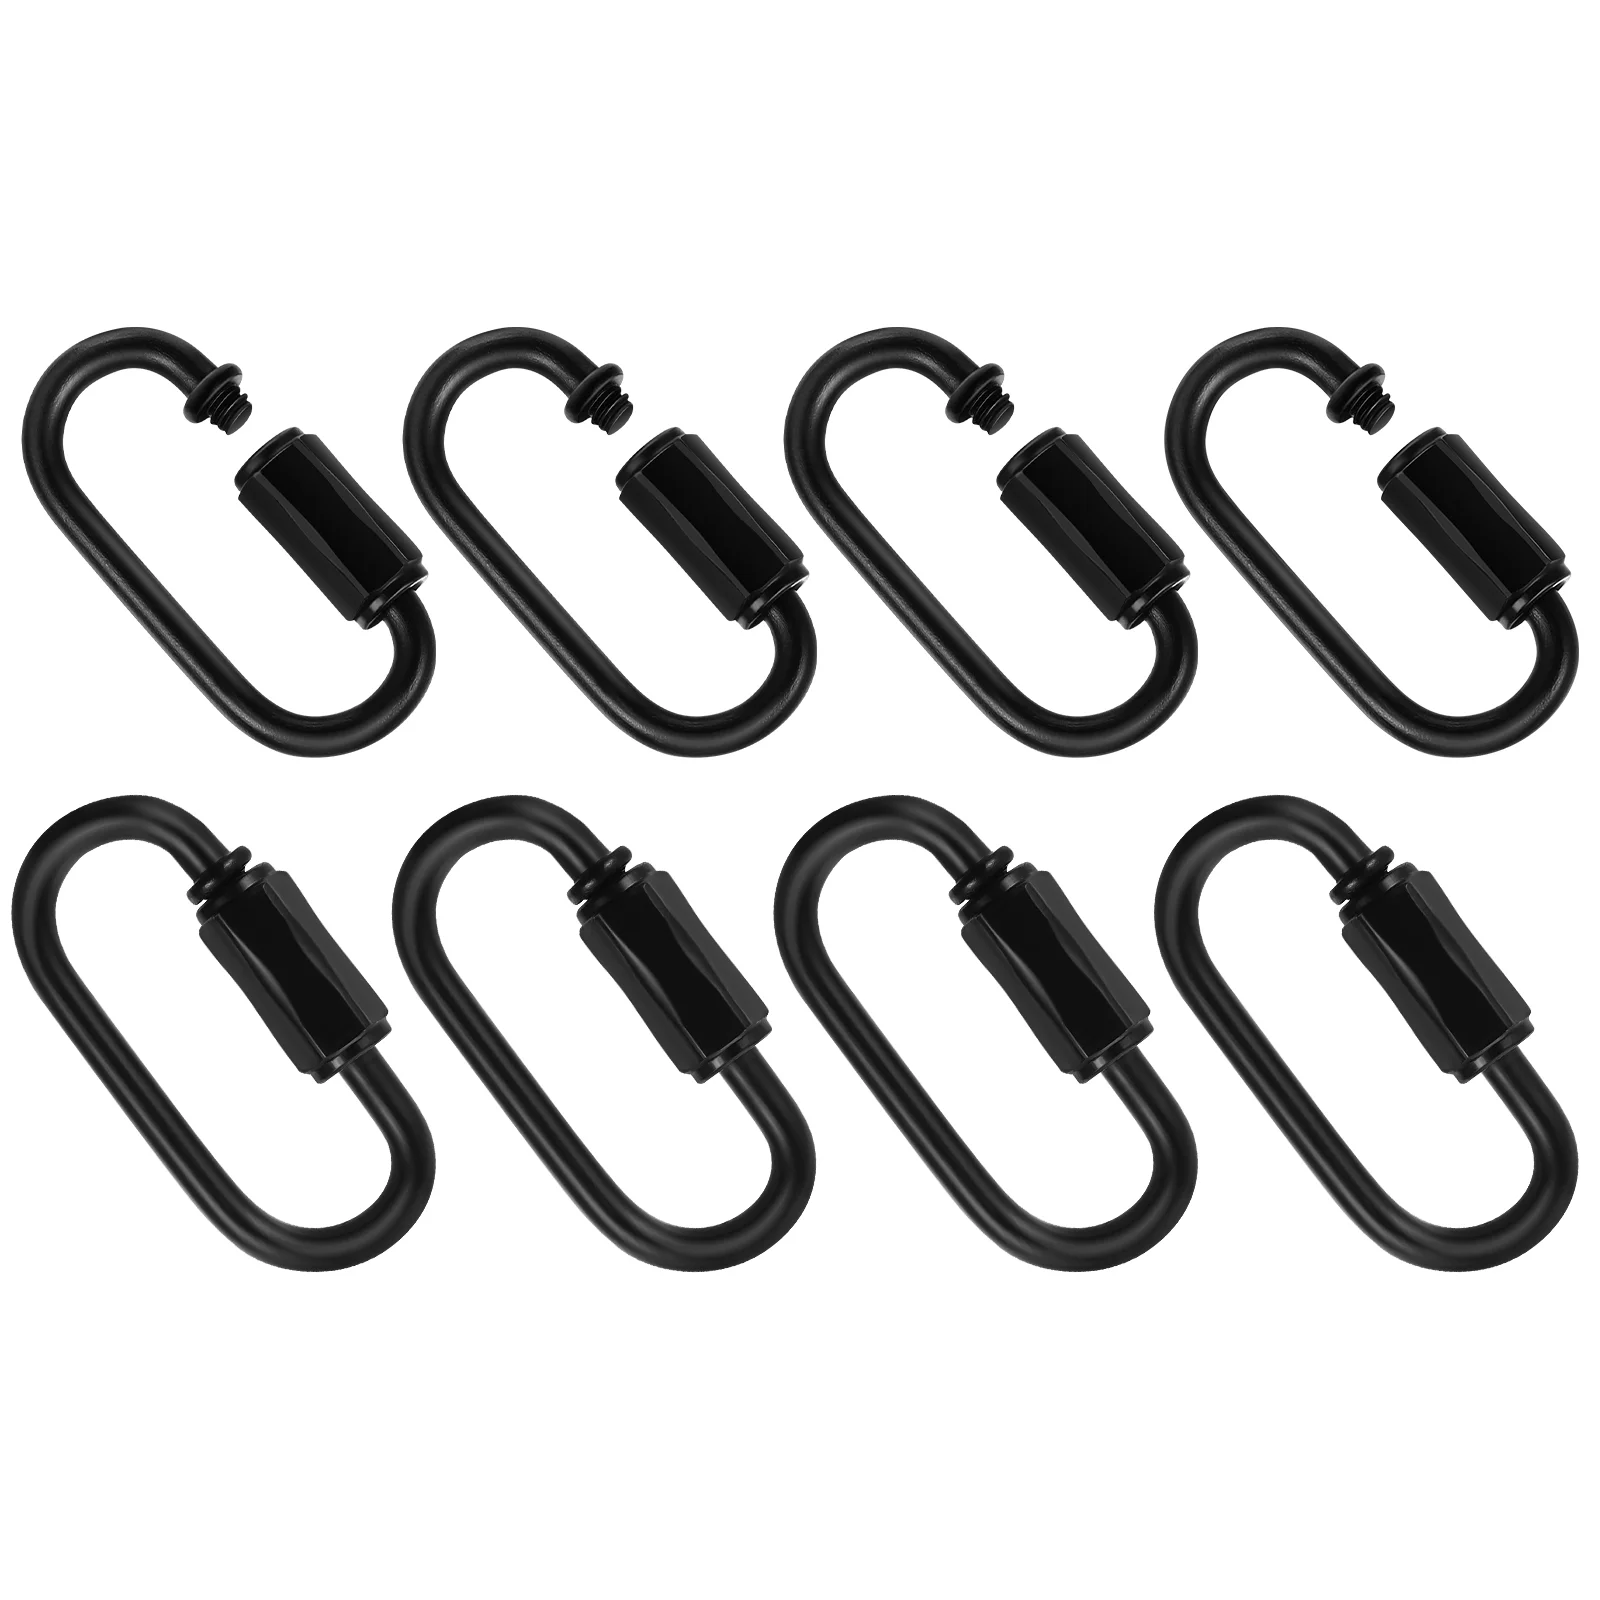 

8pcs Chain Links Stainless Steel Heavy Duty Carabiner Clips Climbing Camping Locking Carabiners